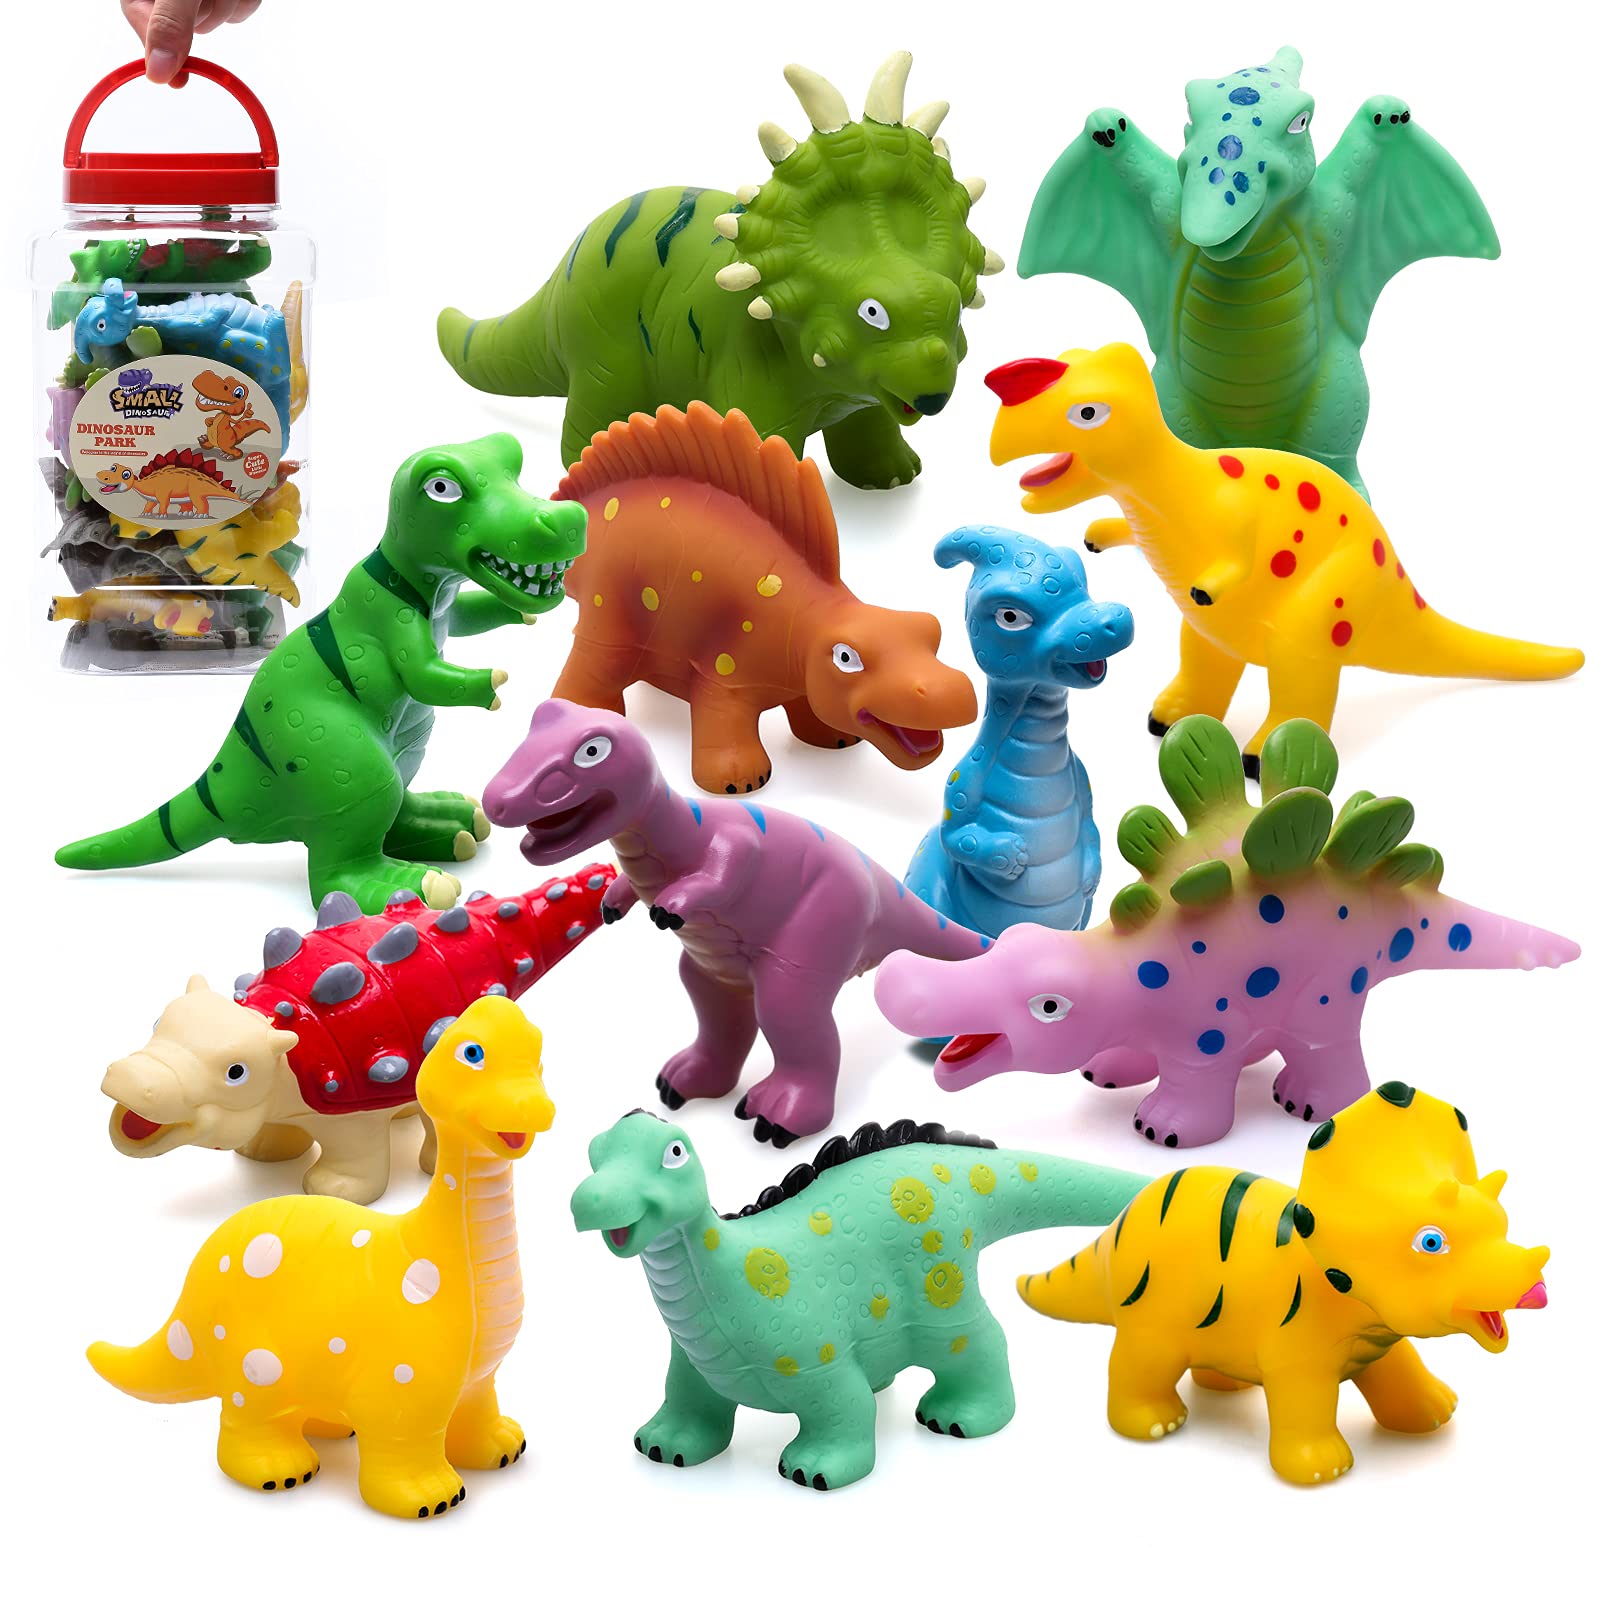 Baby Dinosaur Bath Toys for Toddler 1-3, Mold Free No Holes Bathtub Toys 12 PCS for Bathtime Shower Pool Party, with 4 Stones Decoration, Soft Baby Pool Toys for Boys, Girls